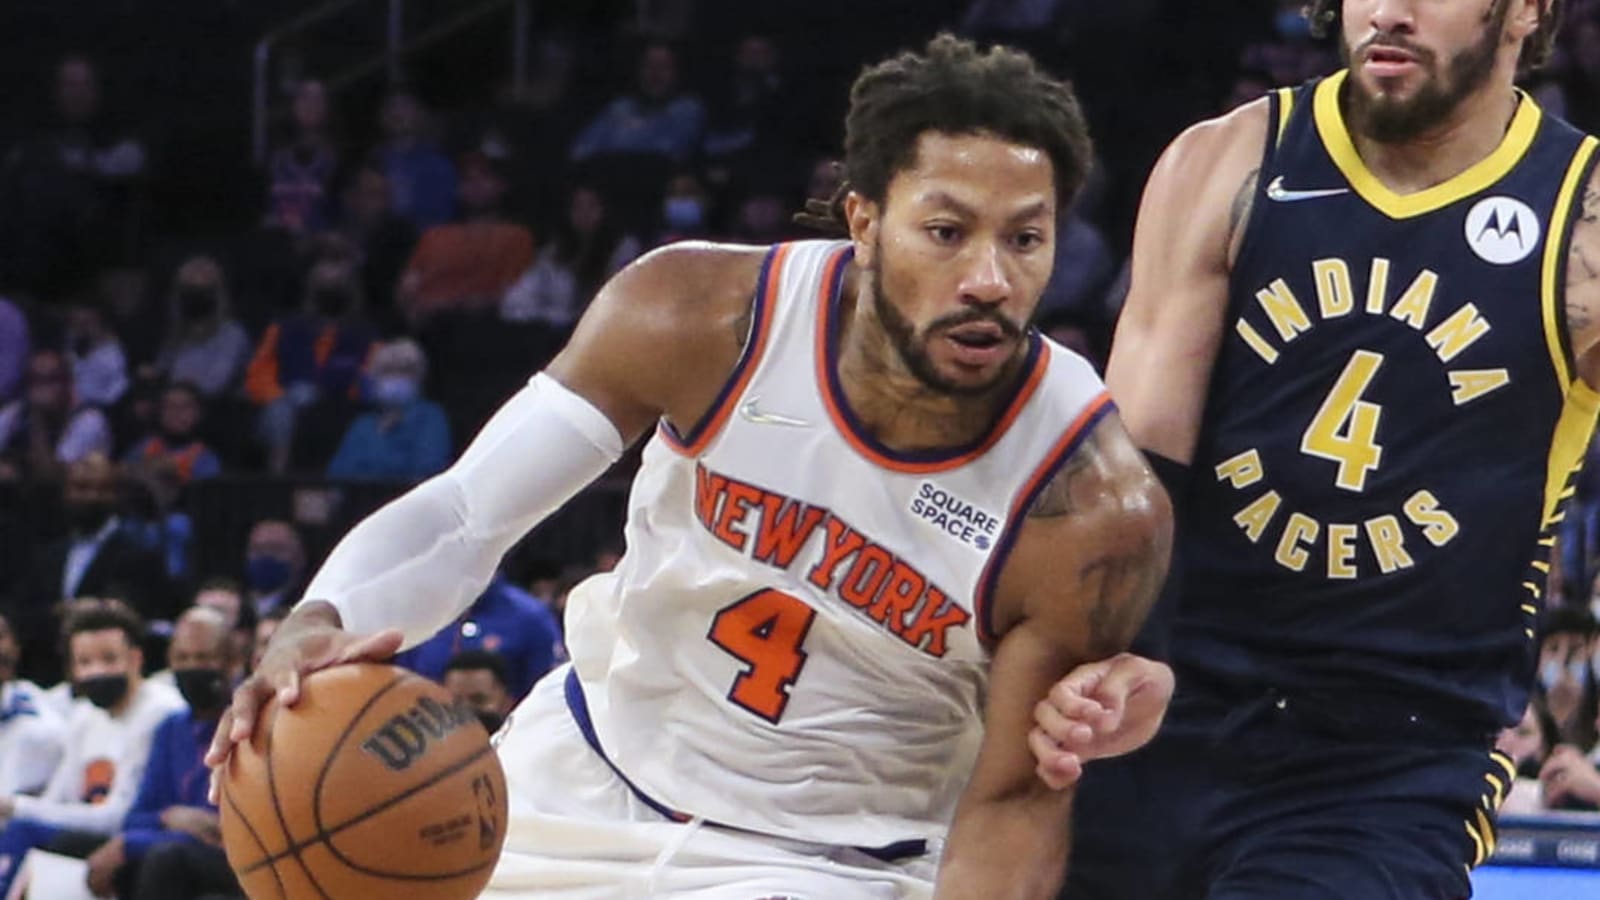 Derrick Rose proposes to girlfriend at MSG